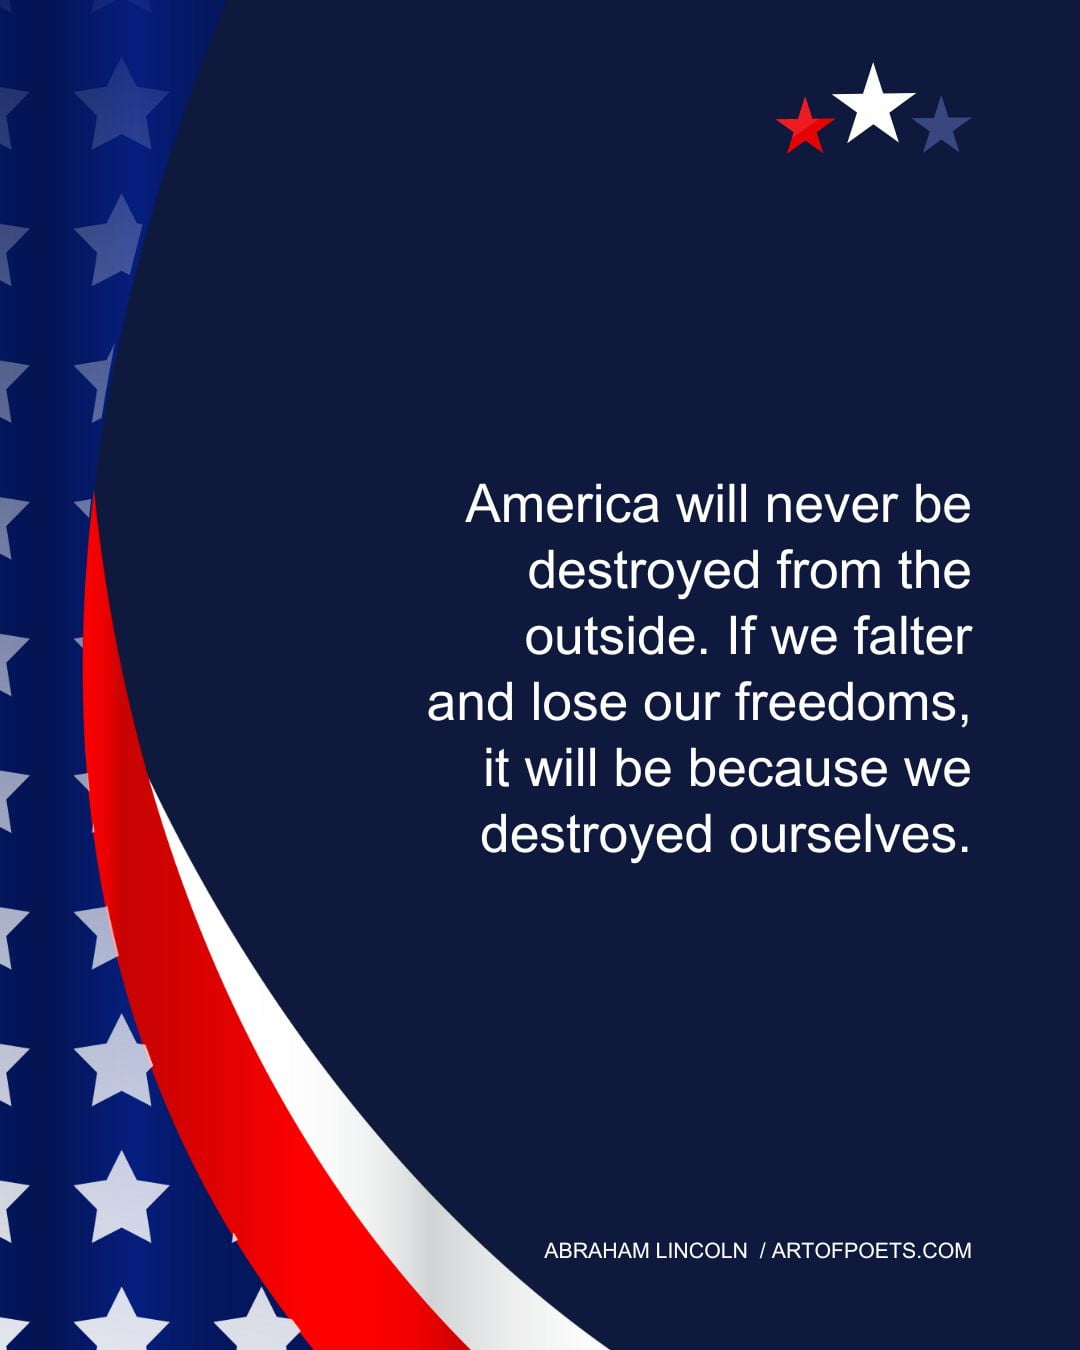 America will never be destroyed from the outside. If we falter and lose our freedoms